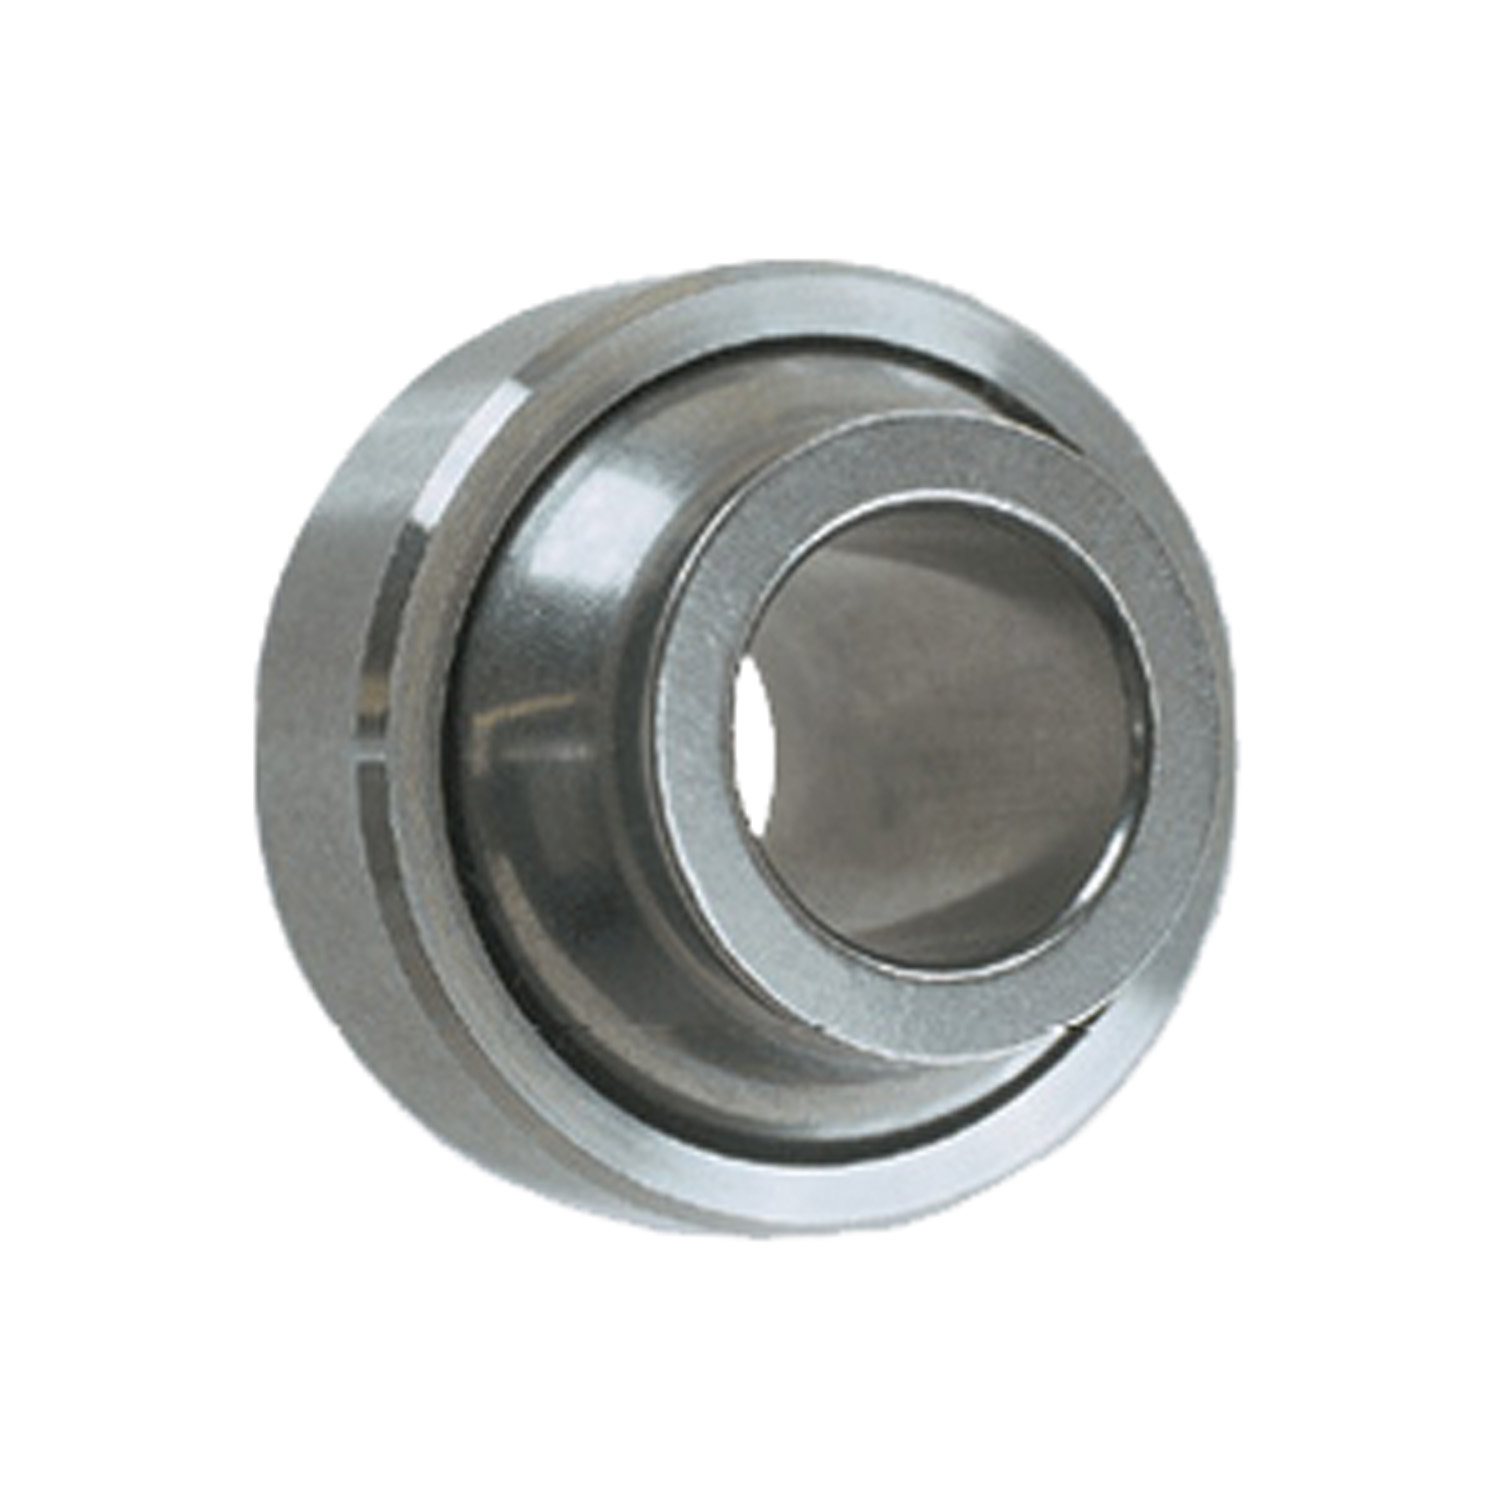 High Misalignment 440C SS Shperical Bearing Hole Size: 0.25"